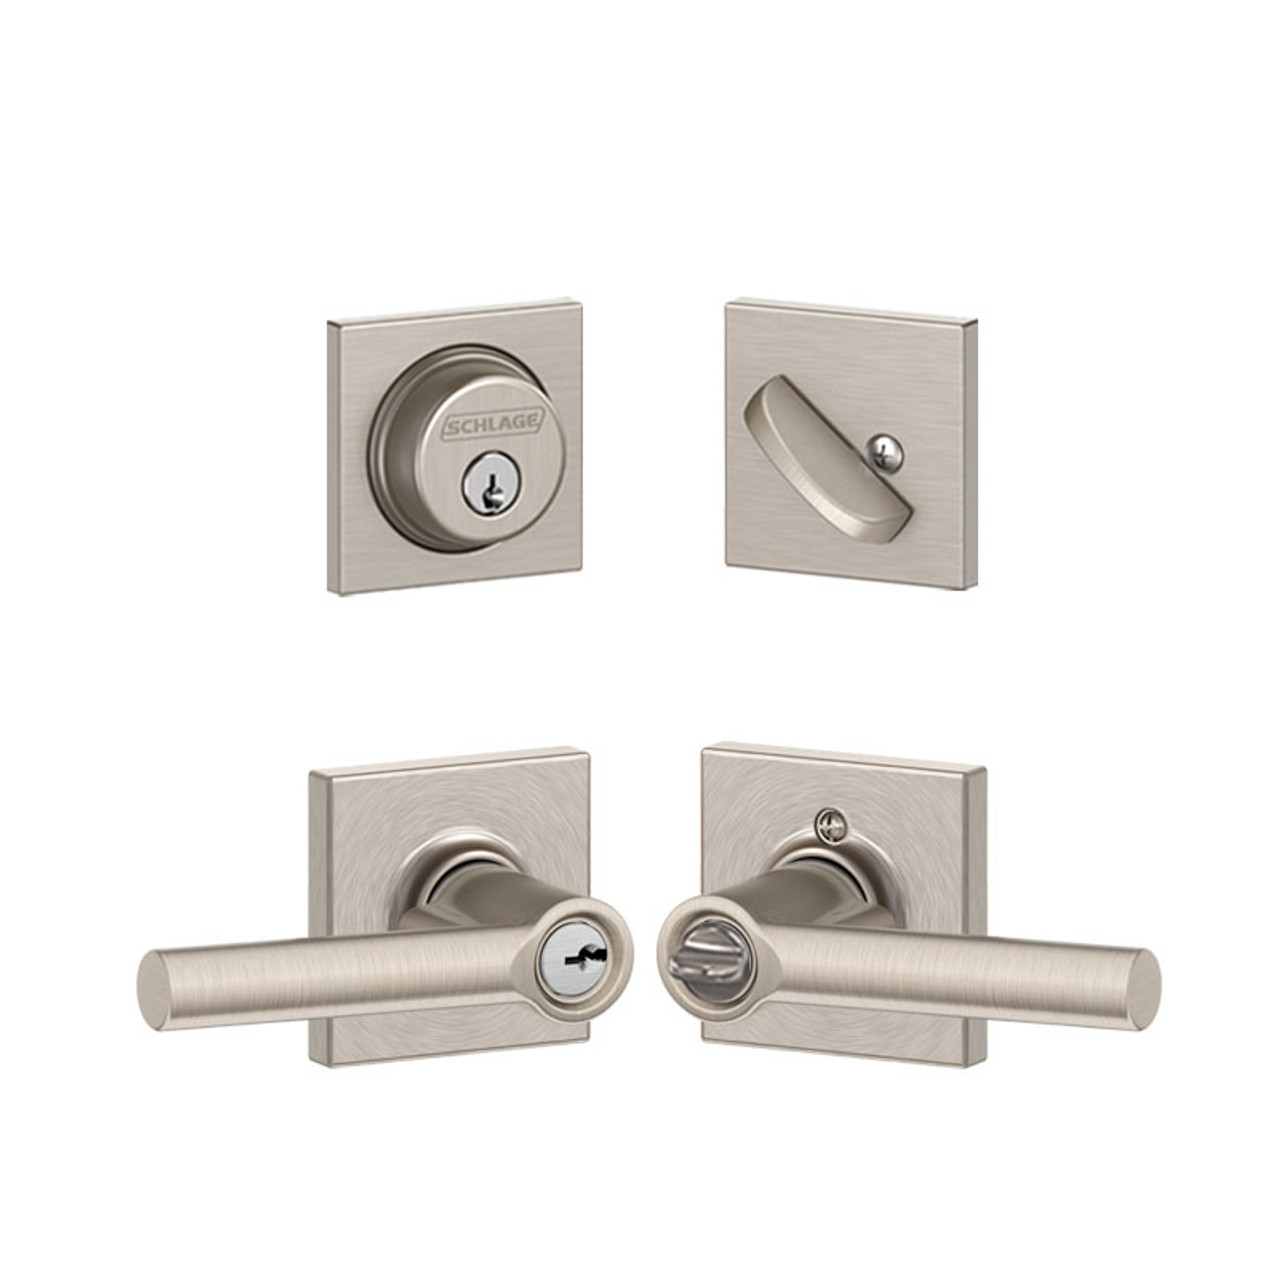 Key-In-Lever Cylinder, Universal, Schlage Style, 6-Pin, Schlage C Keyway,  0-Bitted, 2-Key Blank, Solid Brass, Satin Brass, With Screw-On End Cap